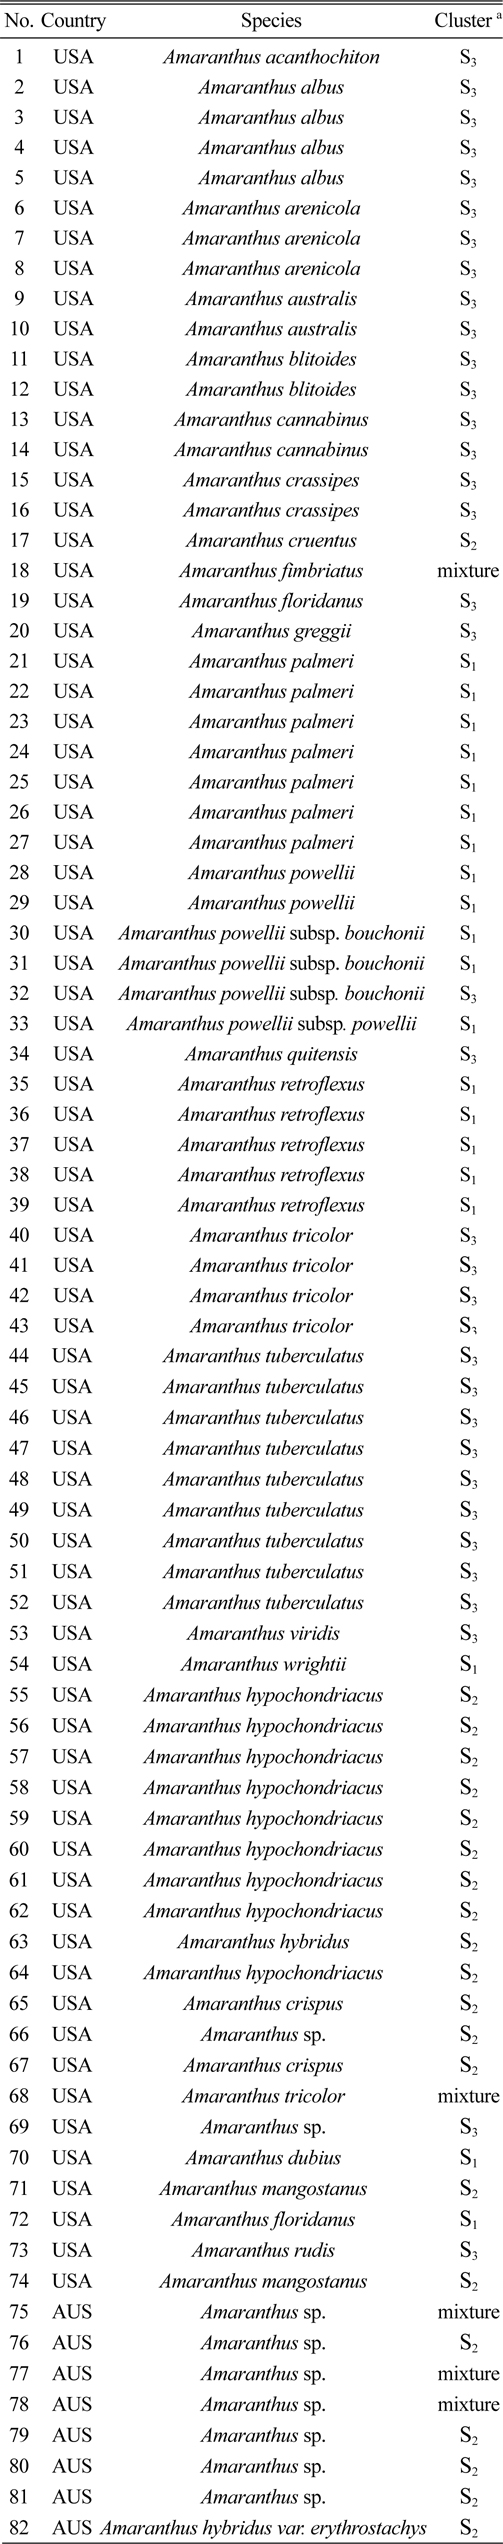 The 82 amaranth accessions used in this study